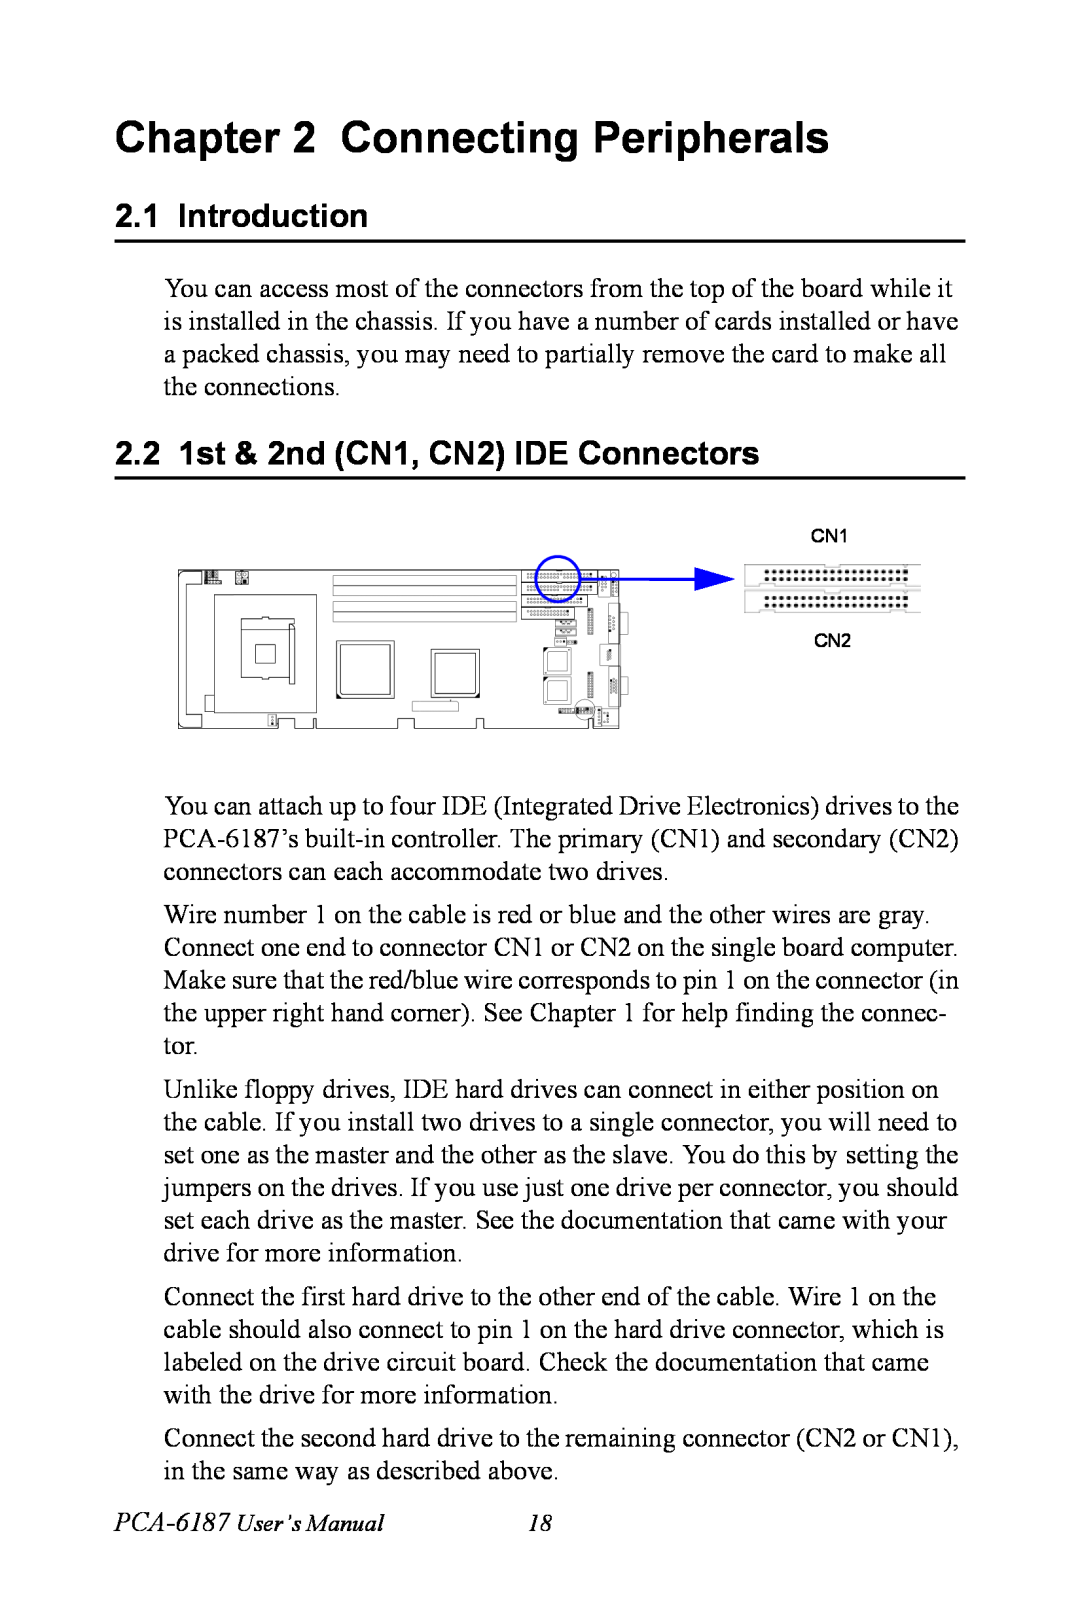 Advantech PCA-6187 user manual Connecting Peripherals, Introduction, 2.2 1st & 2nd CN1, CN2 IDE Connectors 